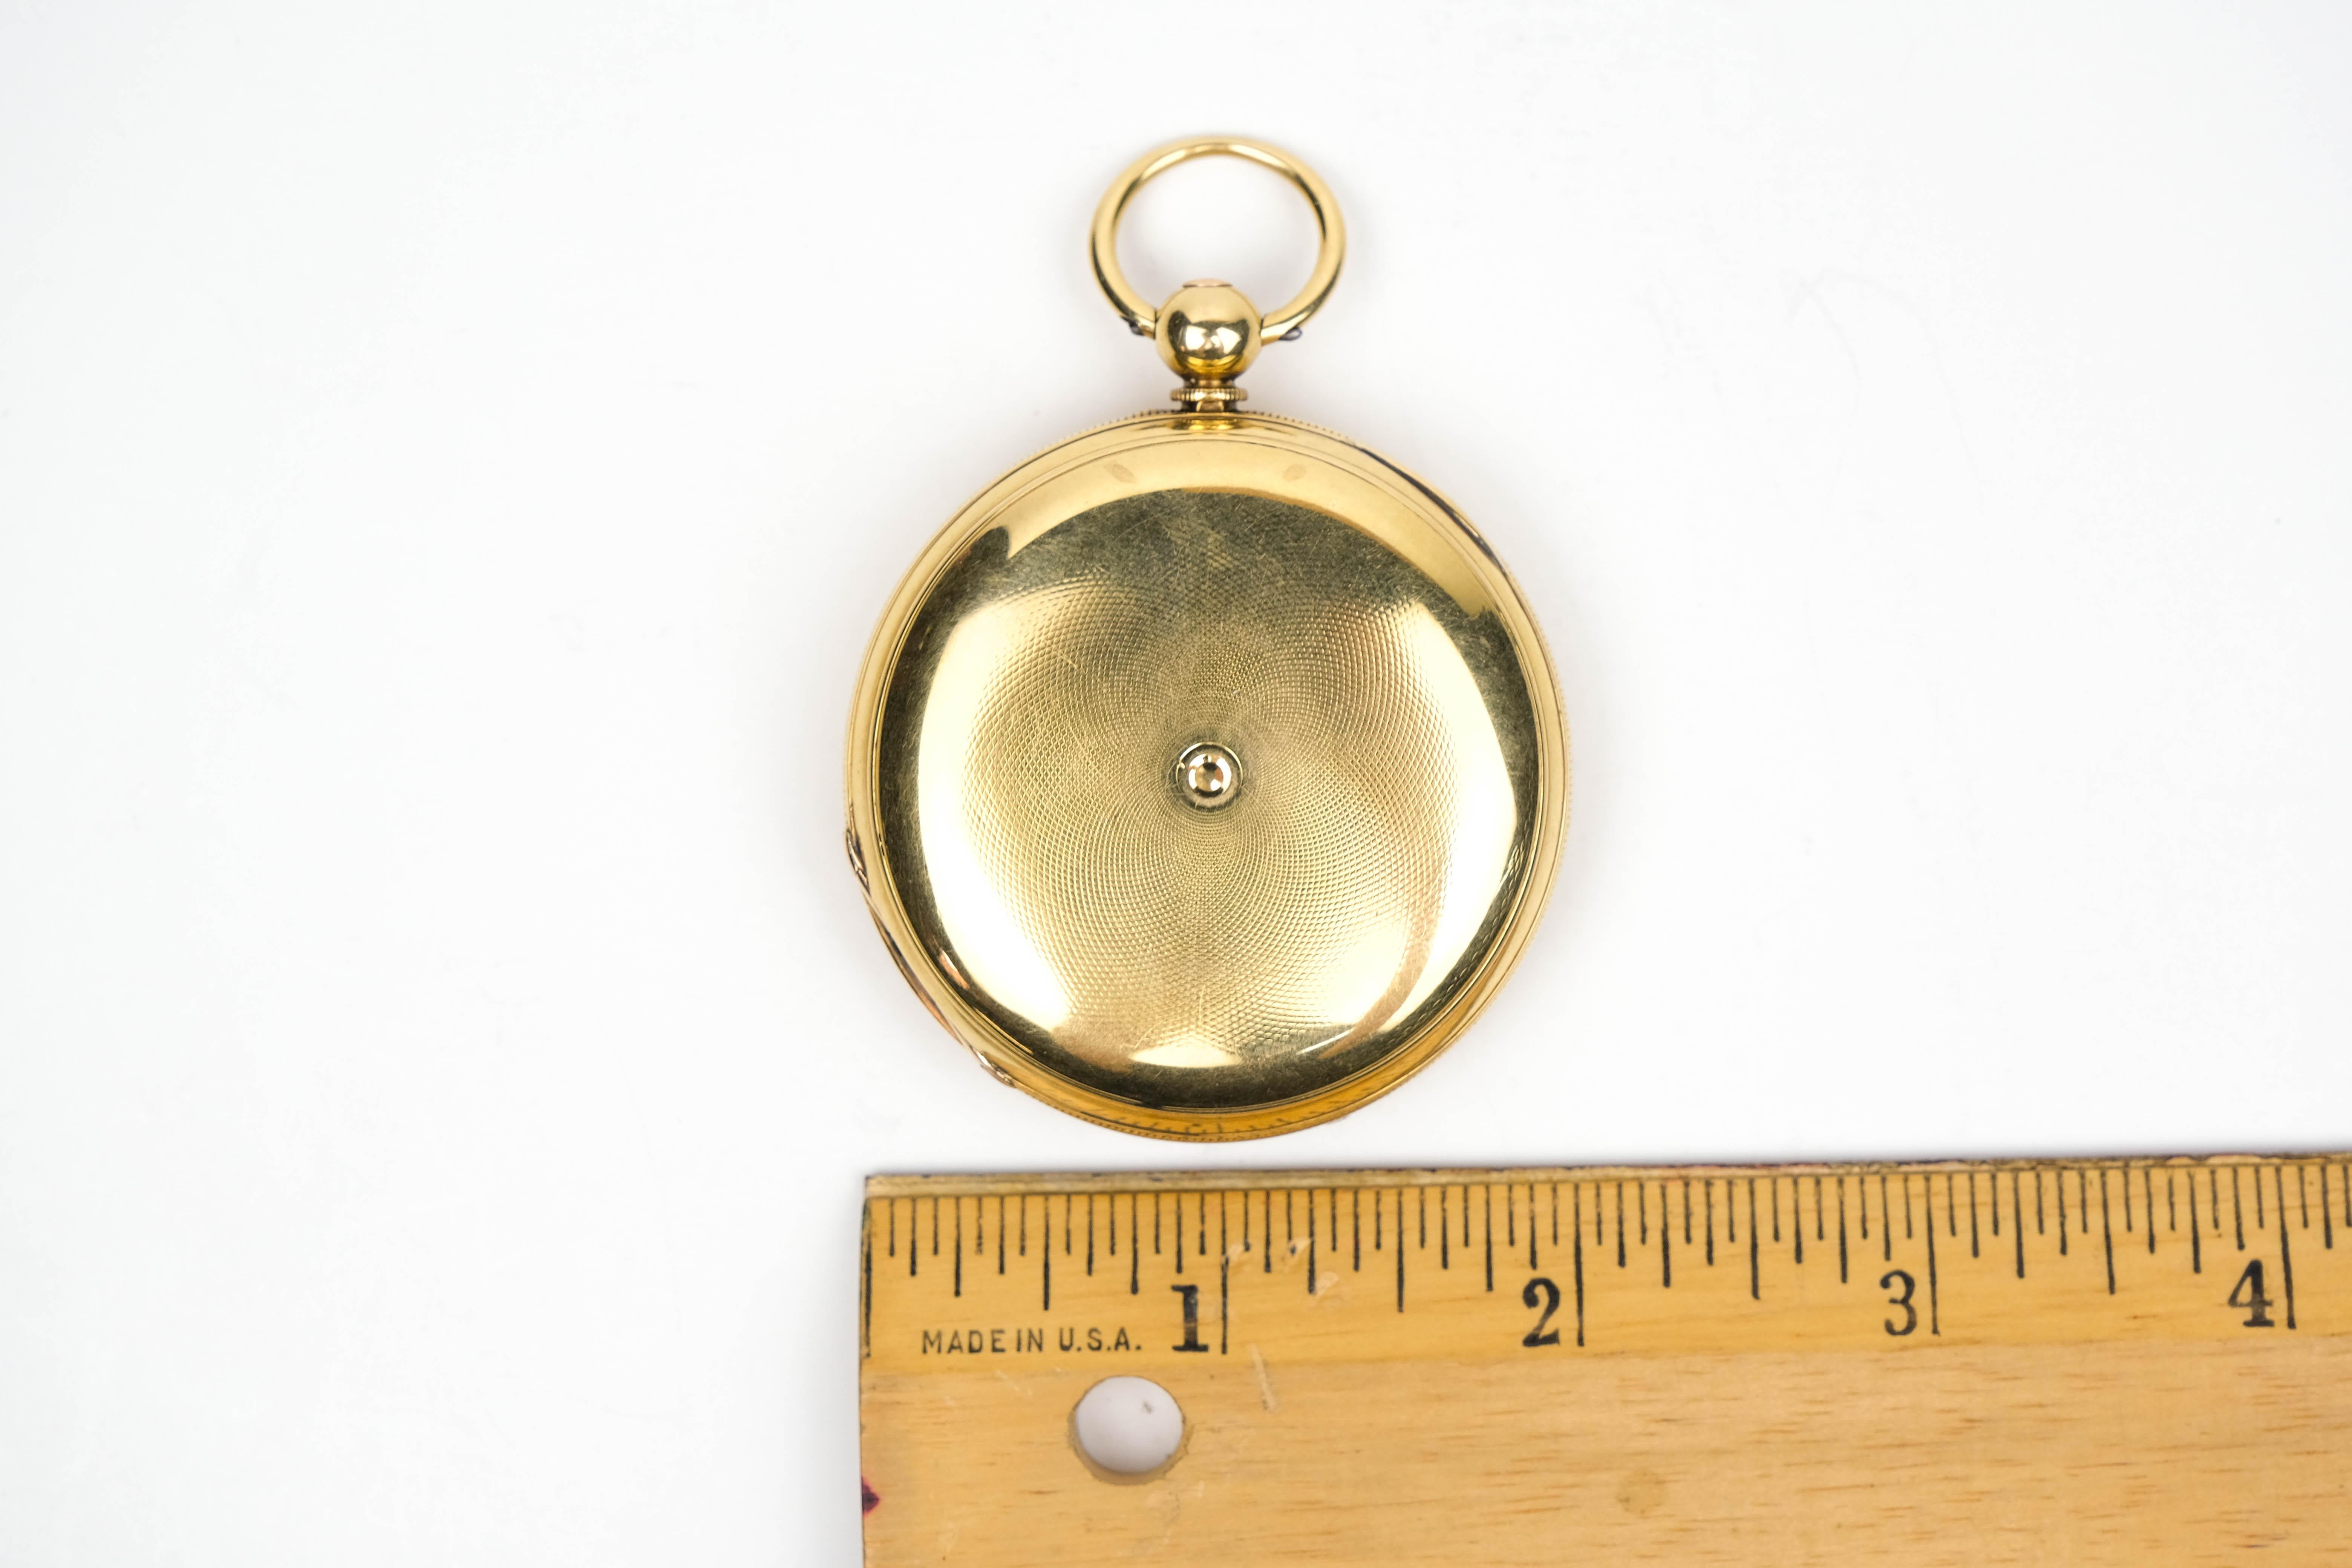 18K Thos. Russel and Son Pocket Watch.

I bought this superb timepiece quite some time ago as its overall condition considering its age and the softness of 18Kt gold made it an imminently desirable acquisition. It does issue from my own